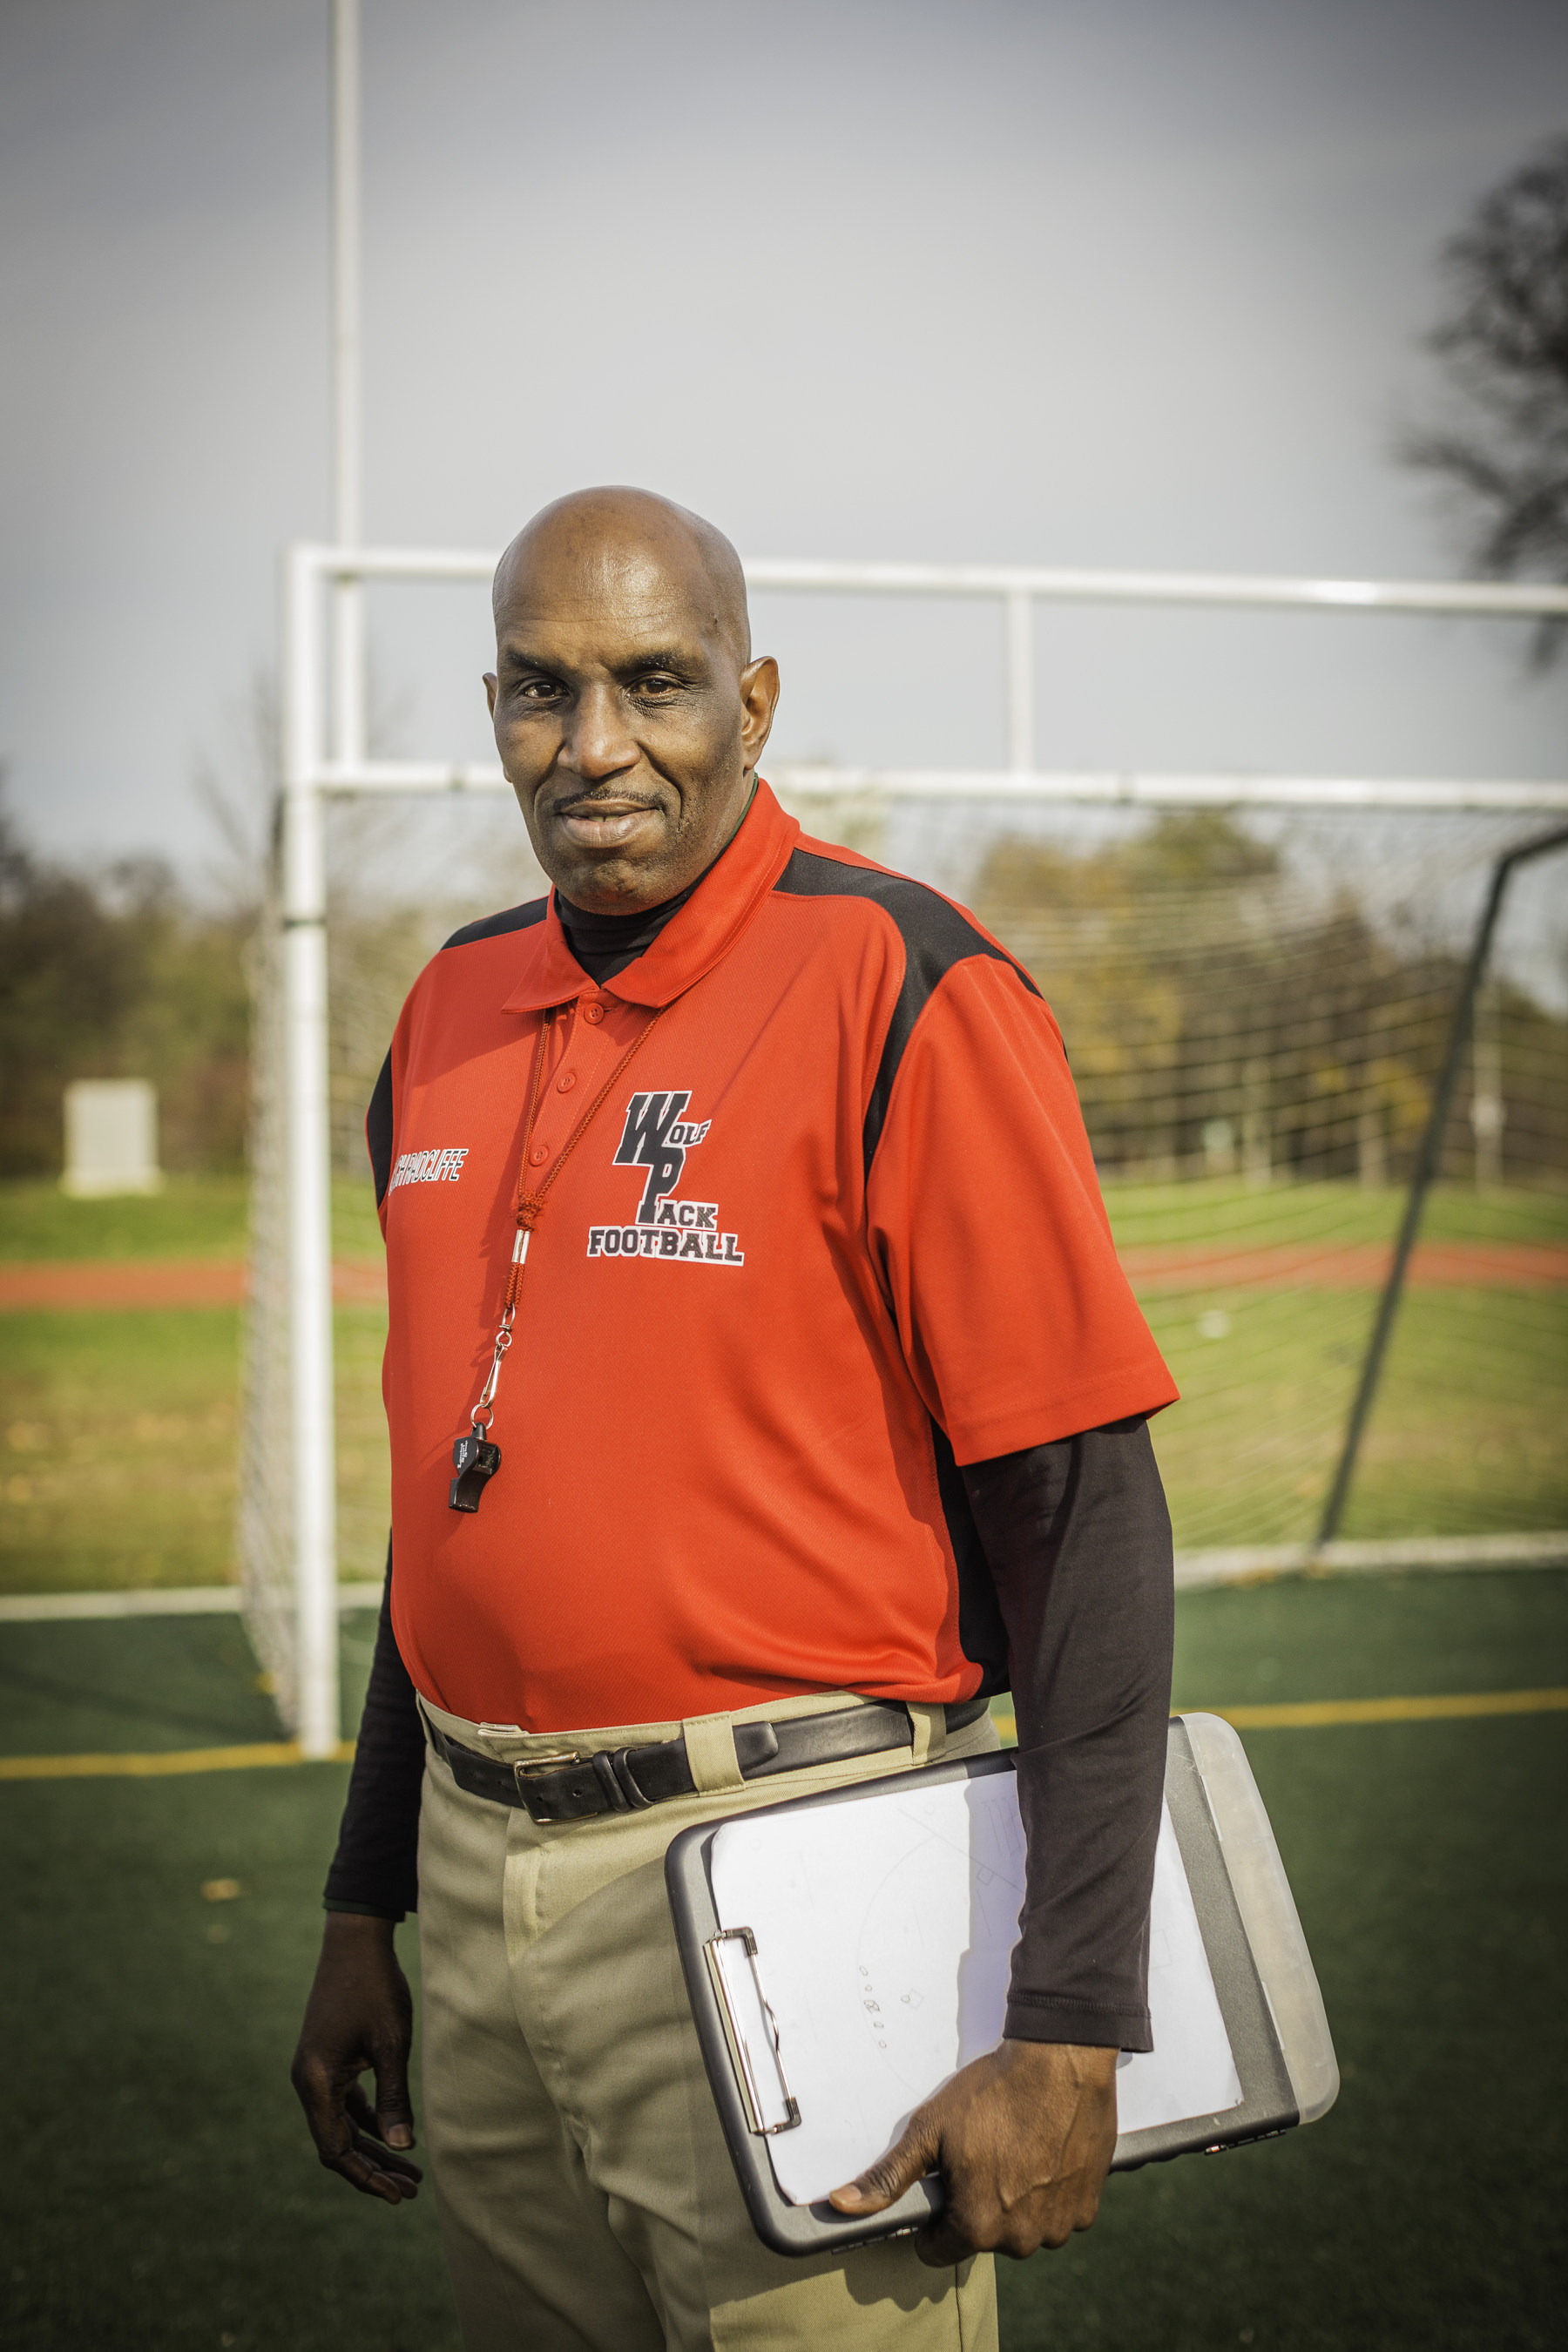 Coach Ernest Radcliffe: Coach of the Southside Wolfpack, Chicago, Illinois